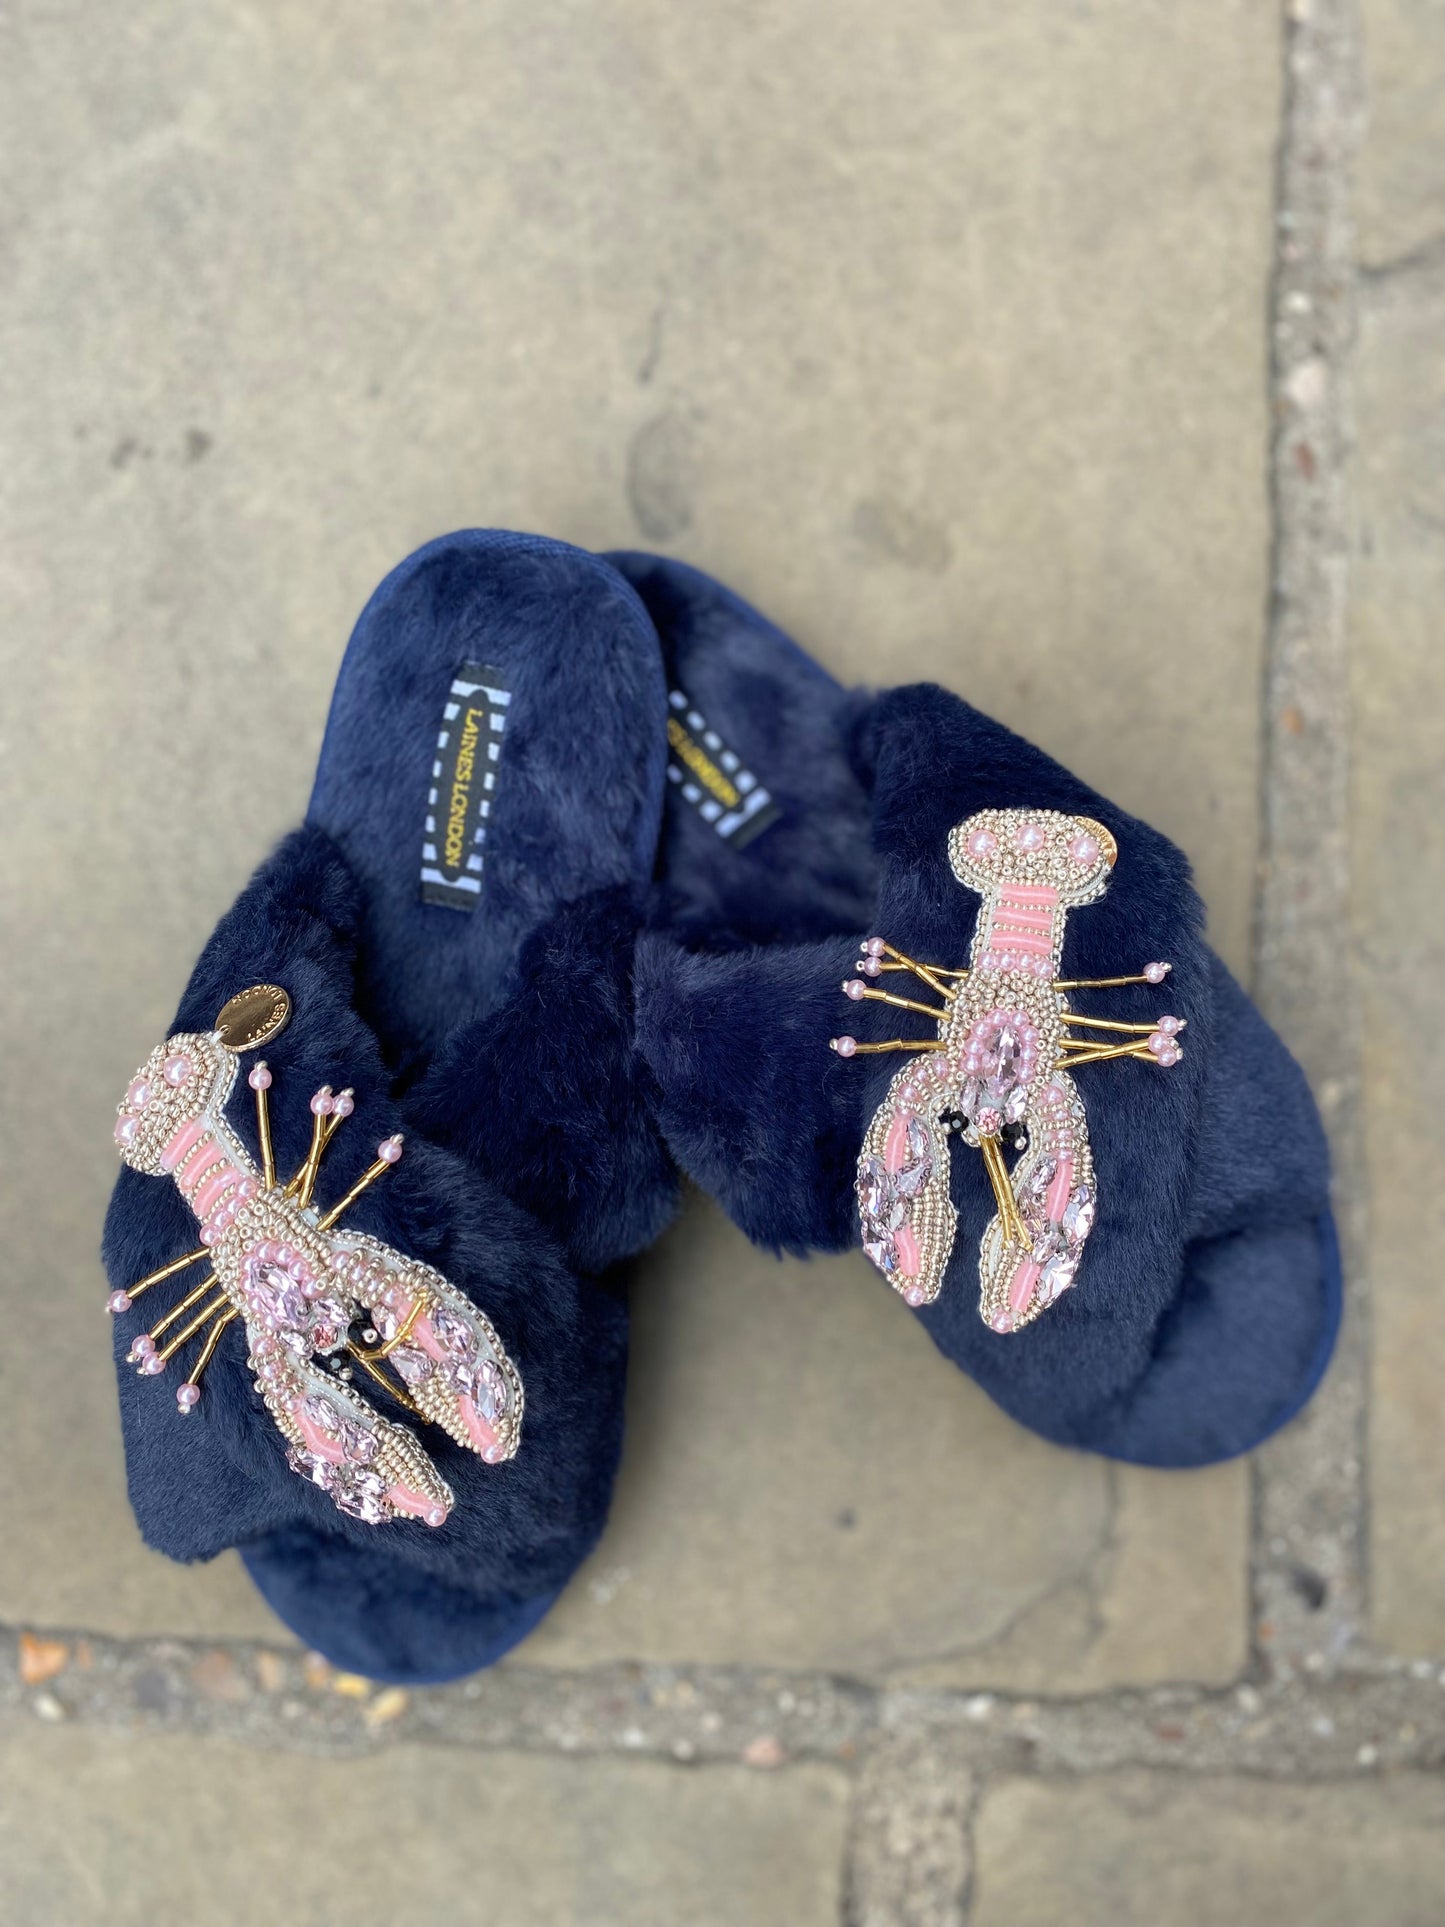 Double Pink Lobsters on Classic Navy Slippers